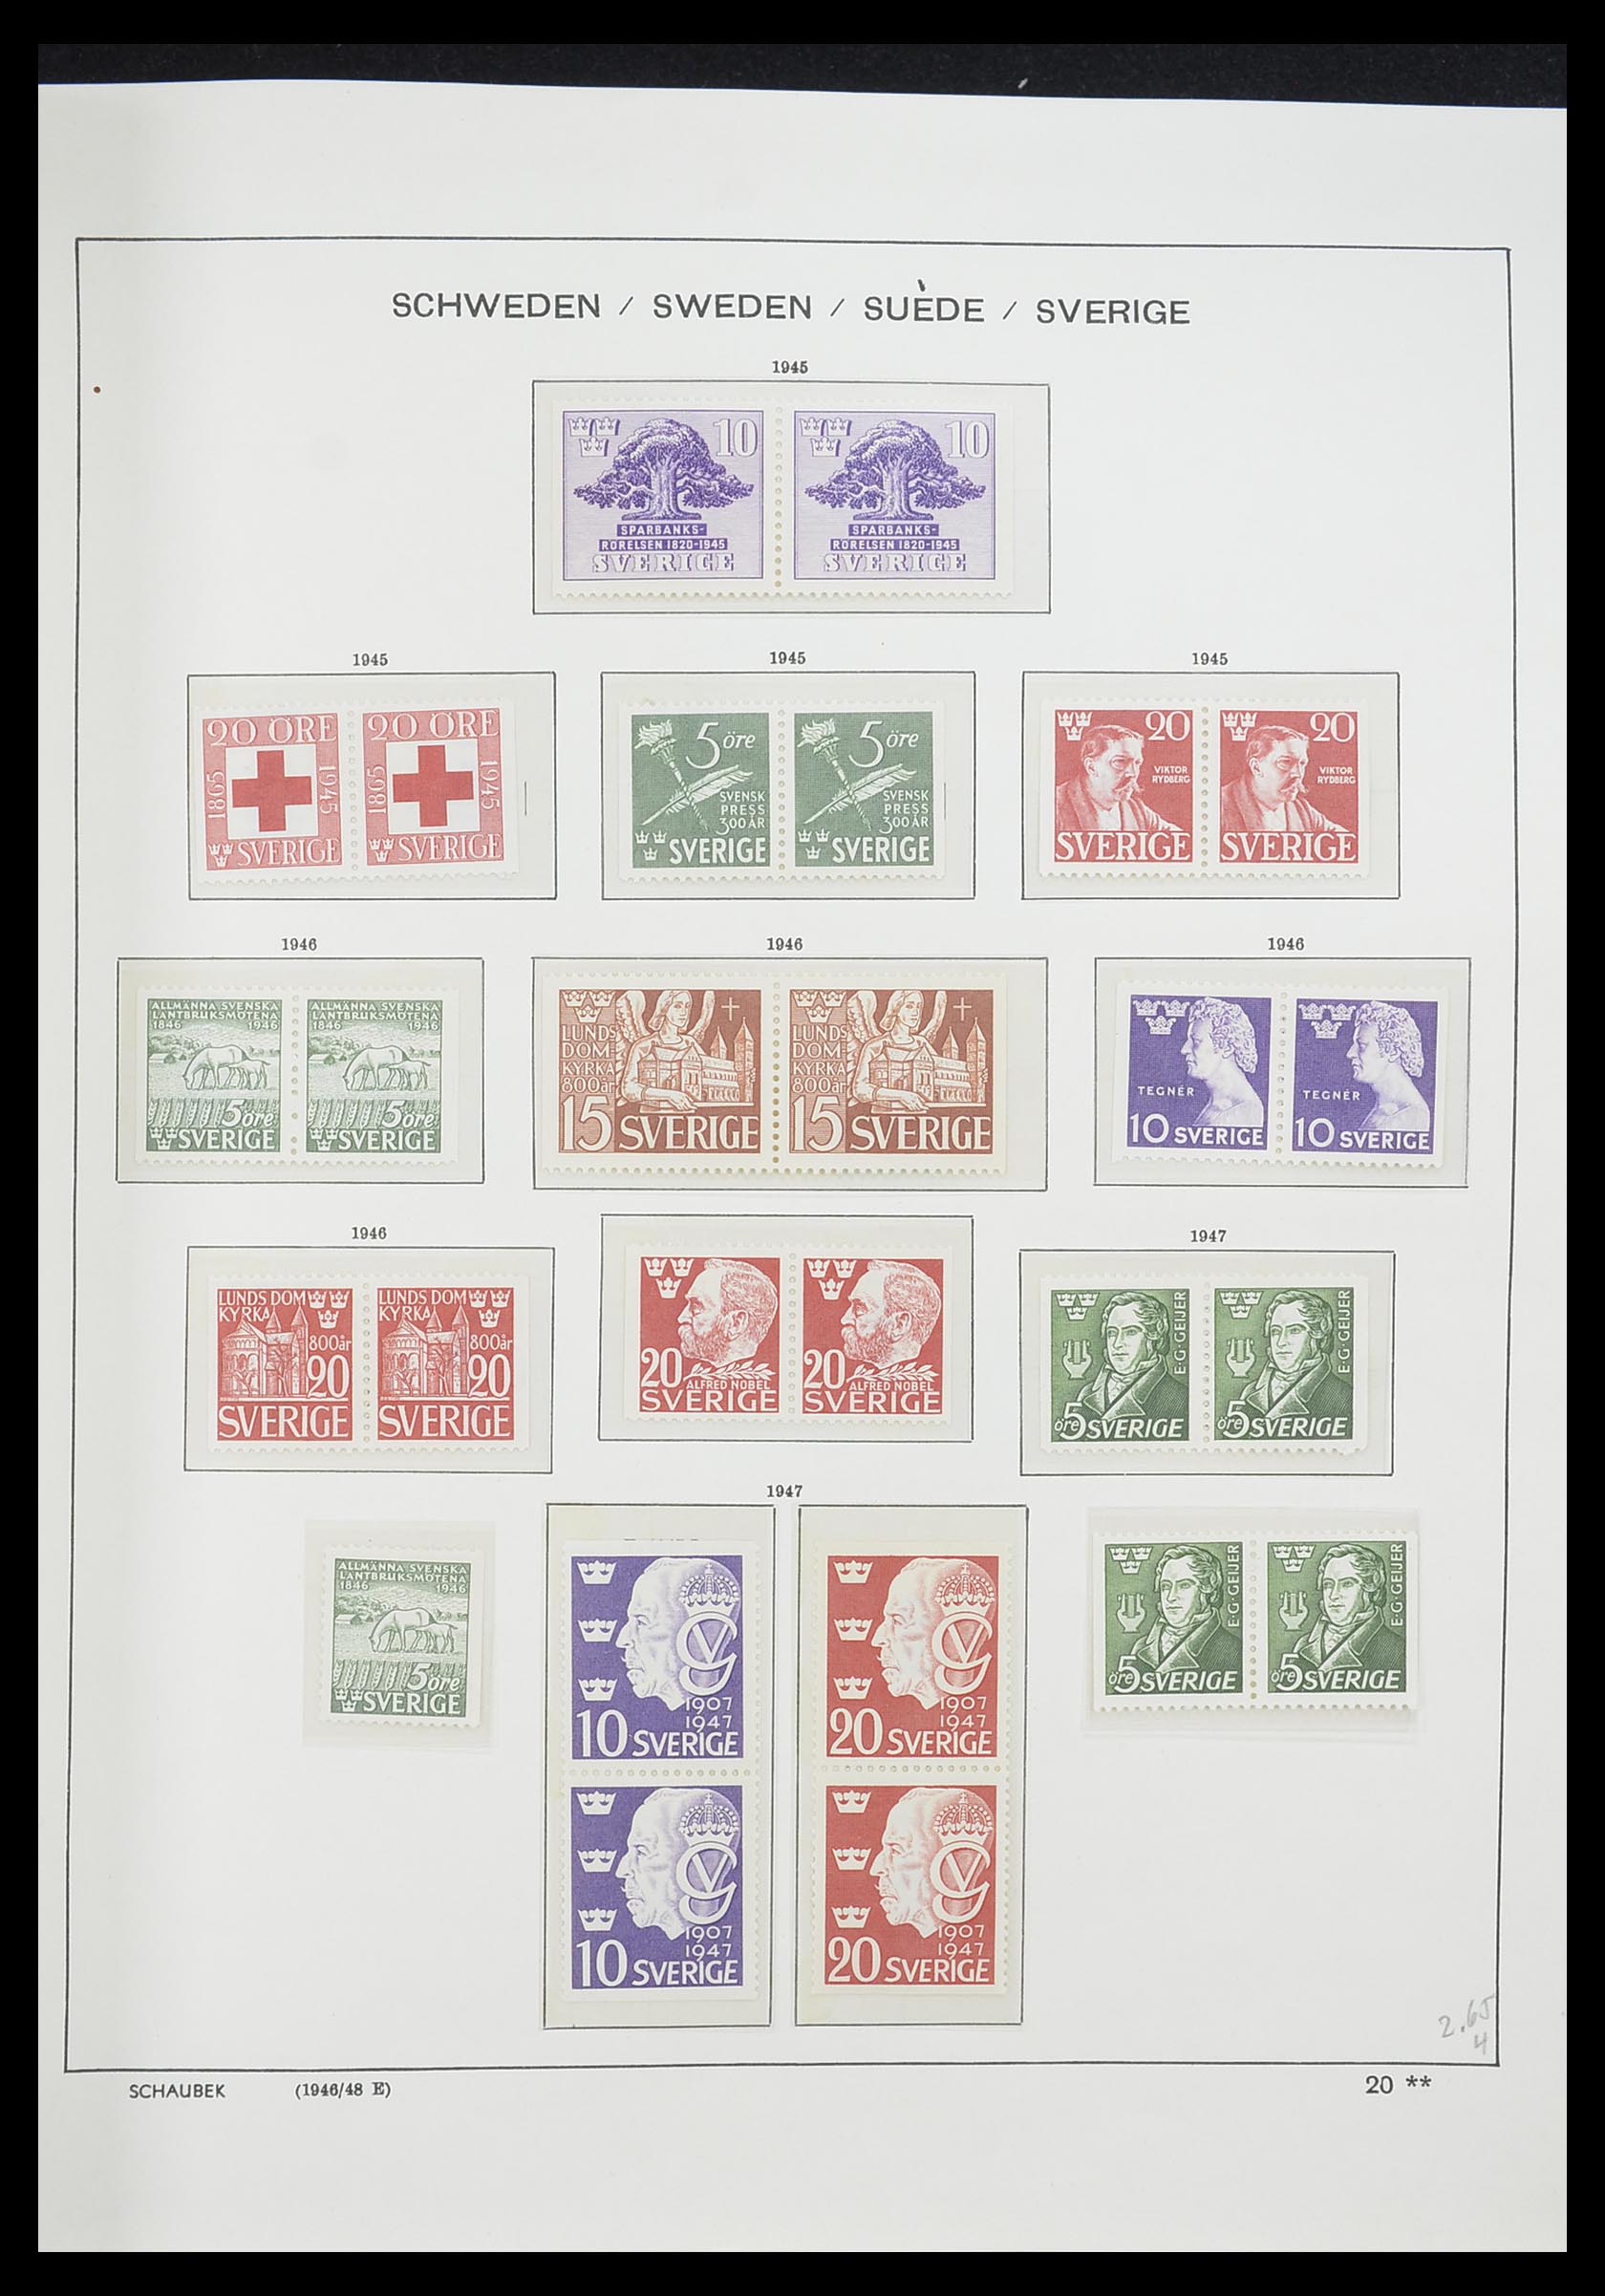 33293 034 - Stamp collection 33293 Sweden 1855-1996.